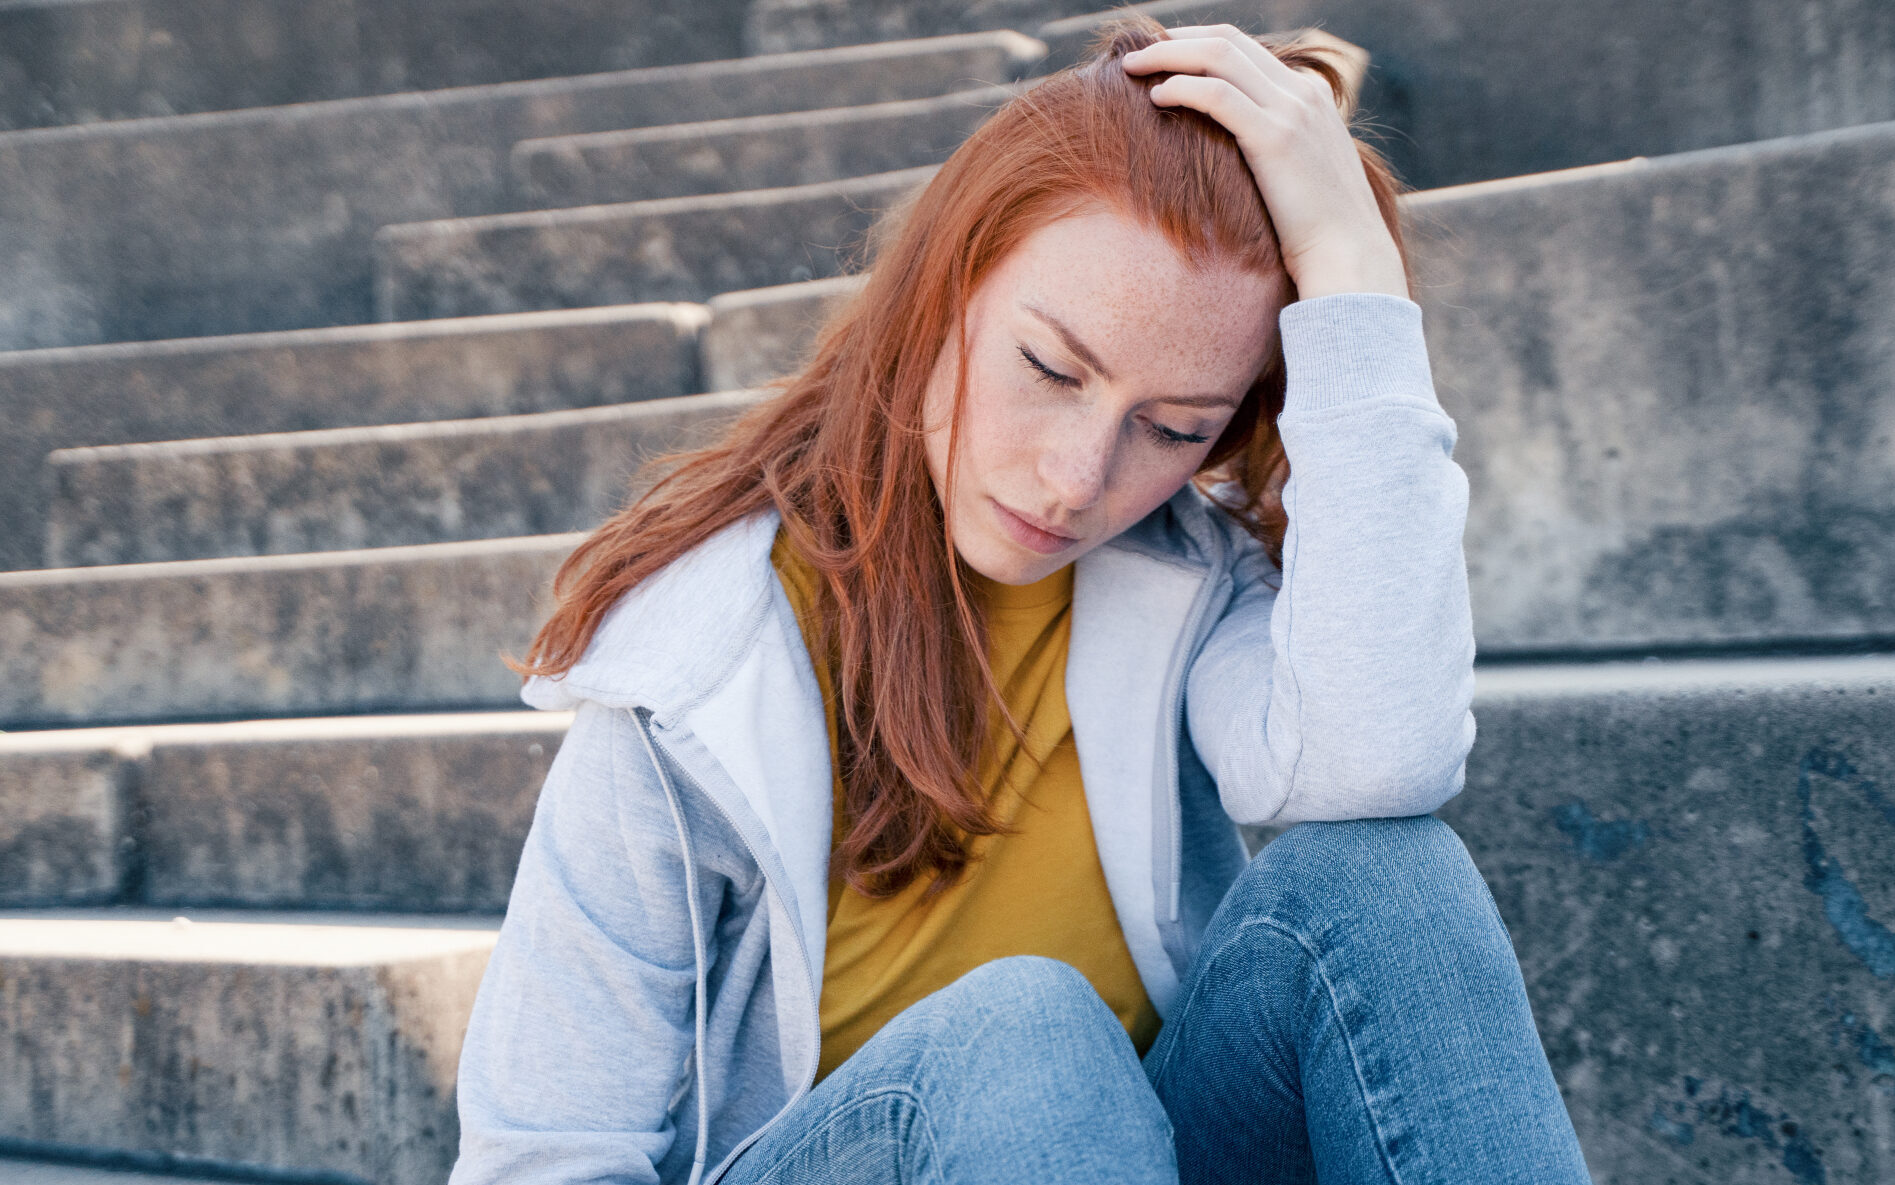 a teenage girl with long ginger hair is sitting down against some outside steps and looking downward toward the ground with a sad expression